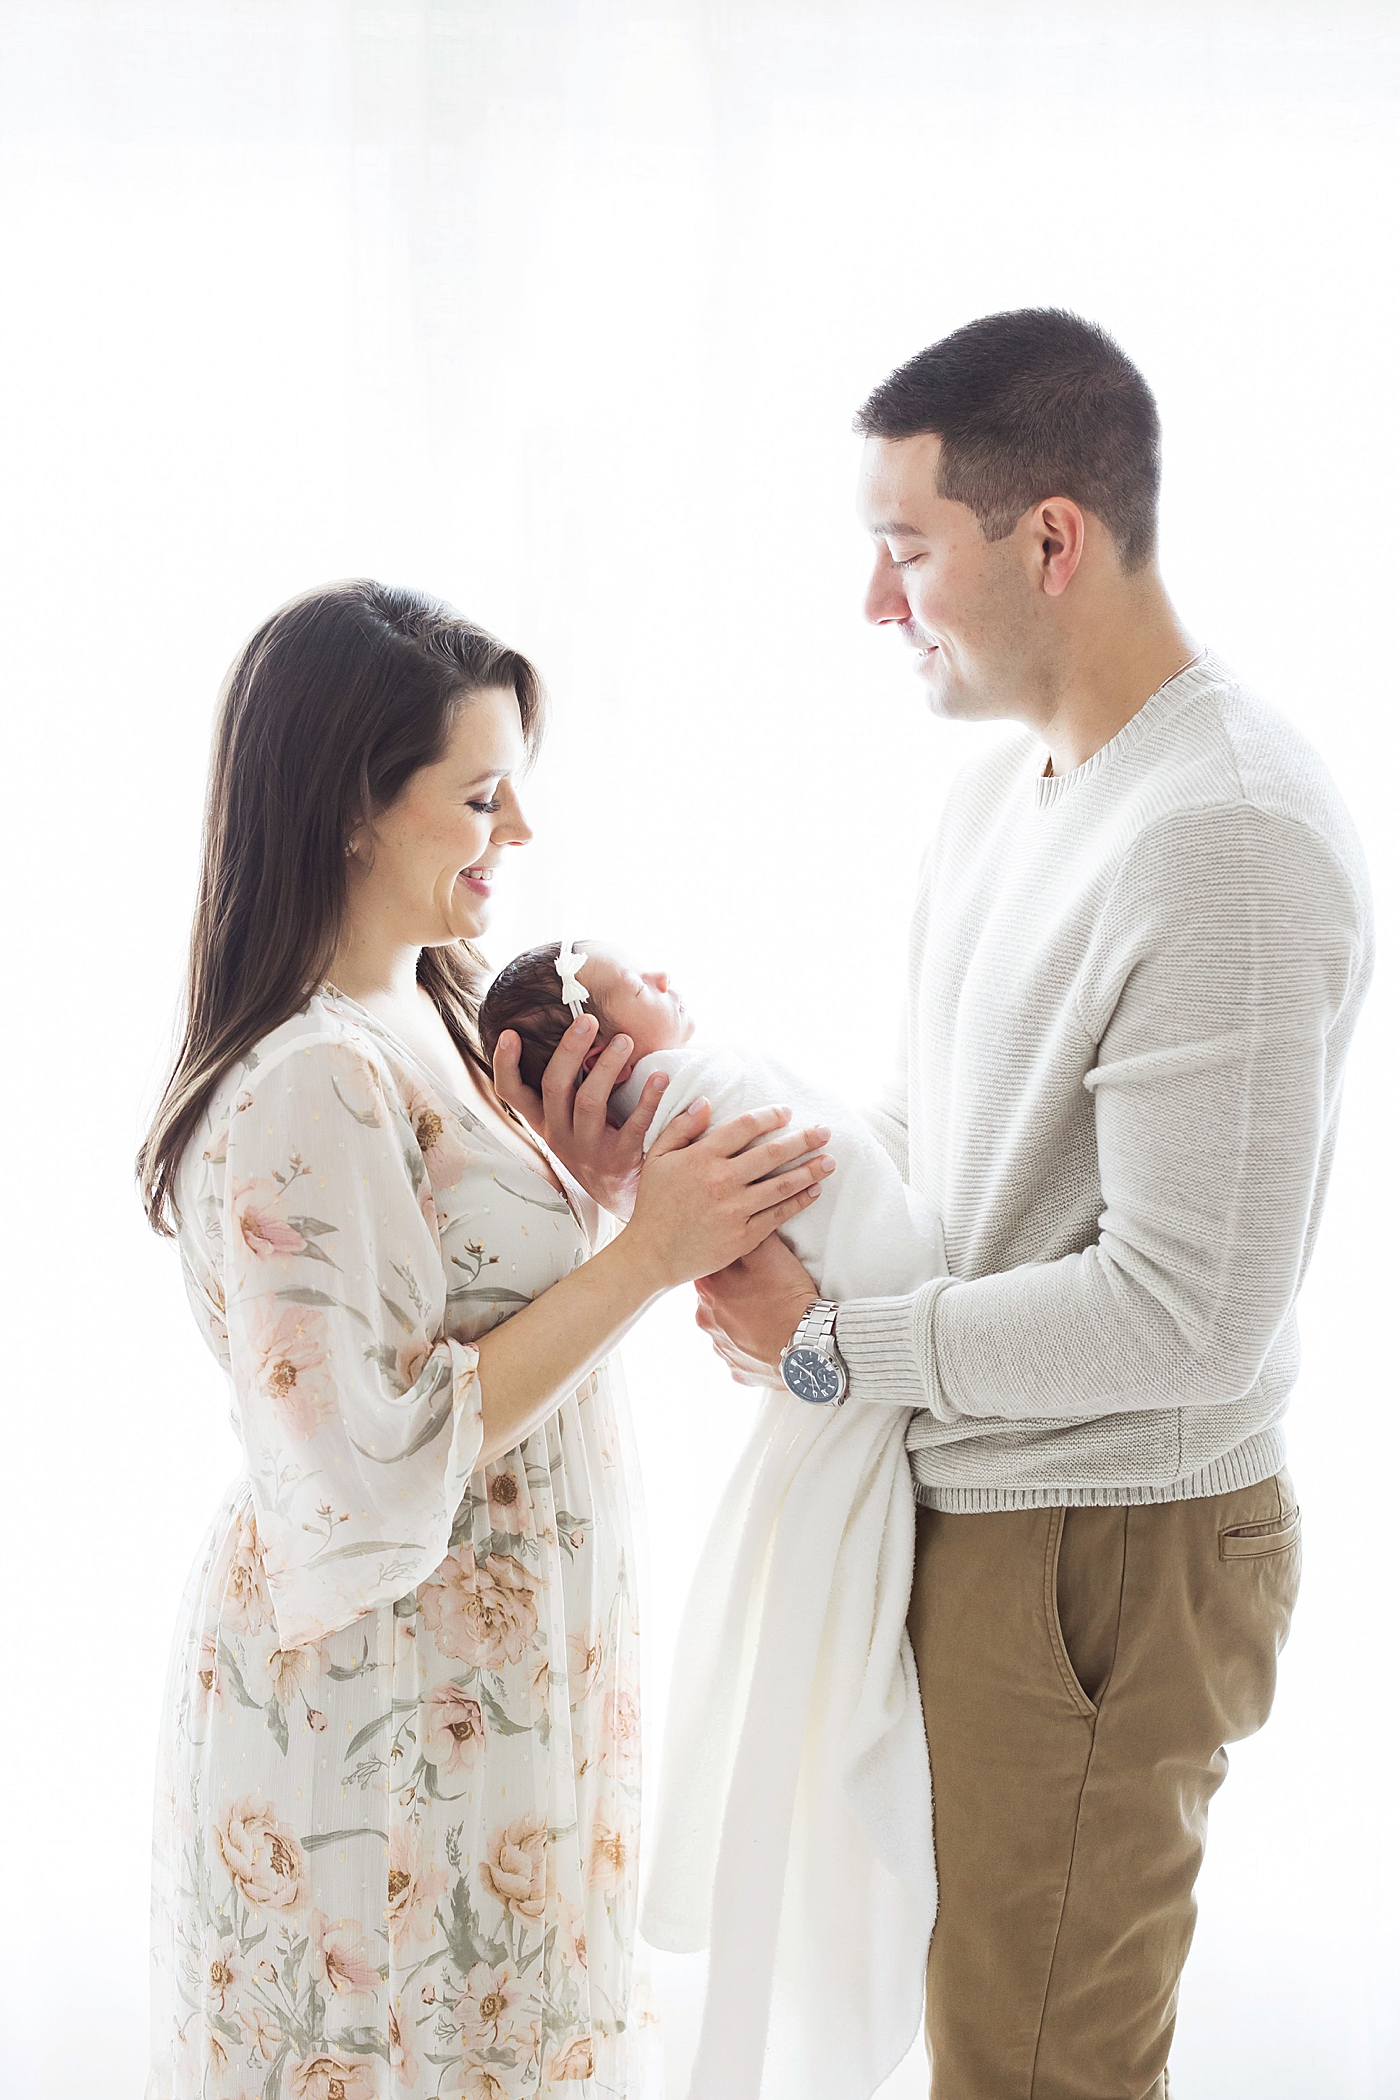 Mom and Dad looking at their daughter during studio newborn session. Photo by Fresh Light Photography.